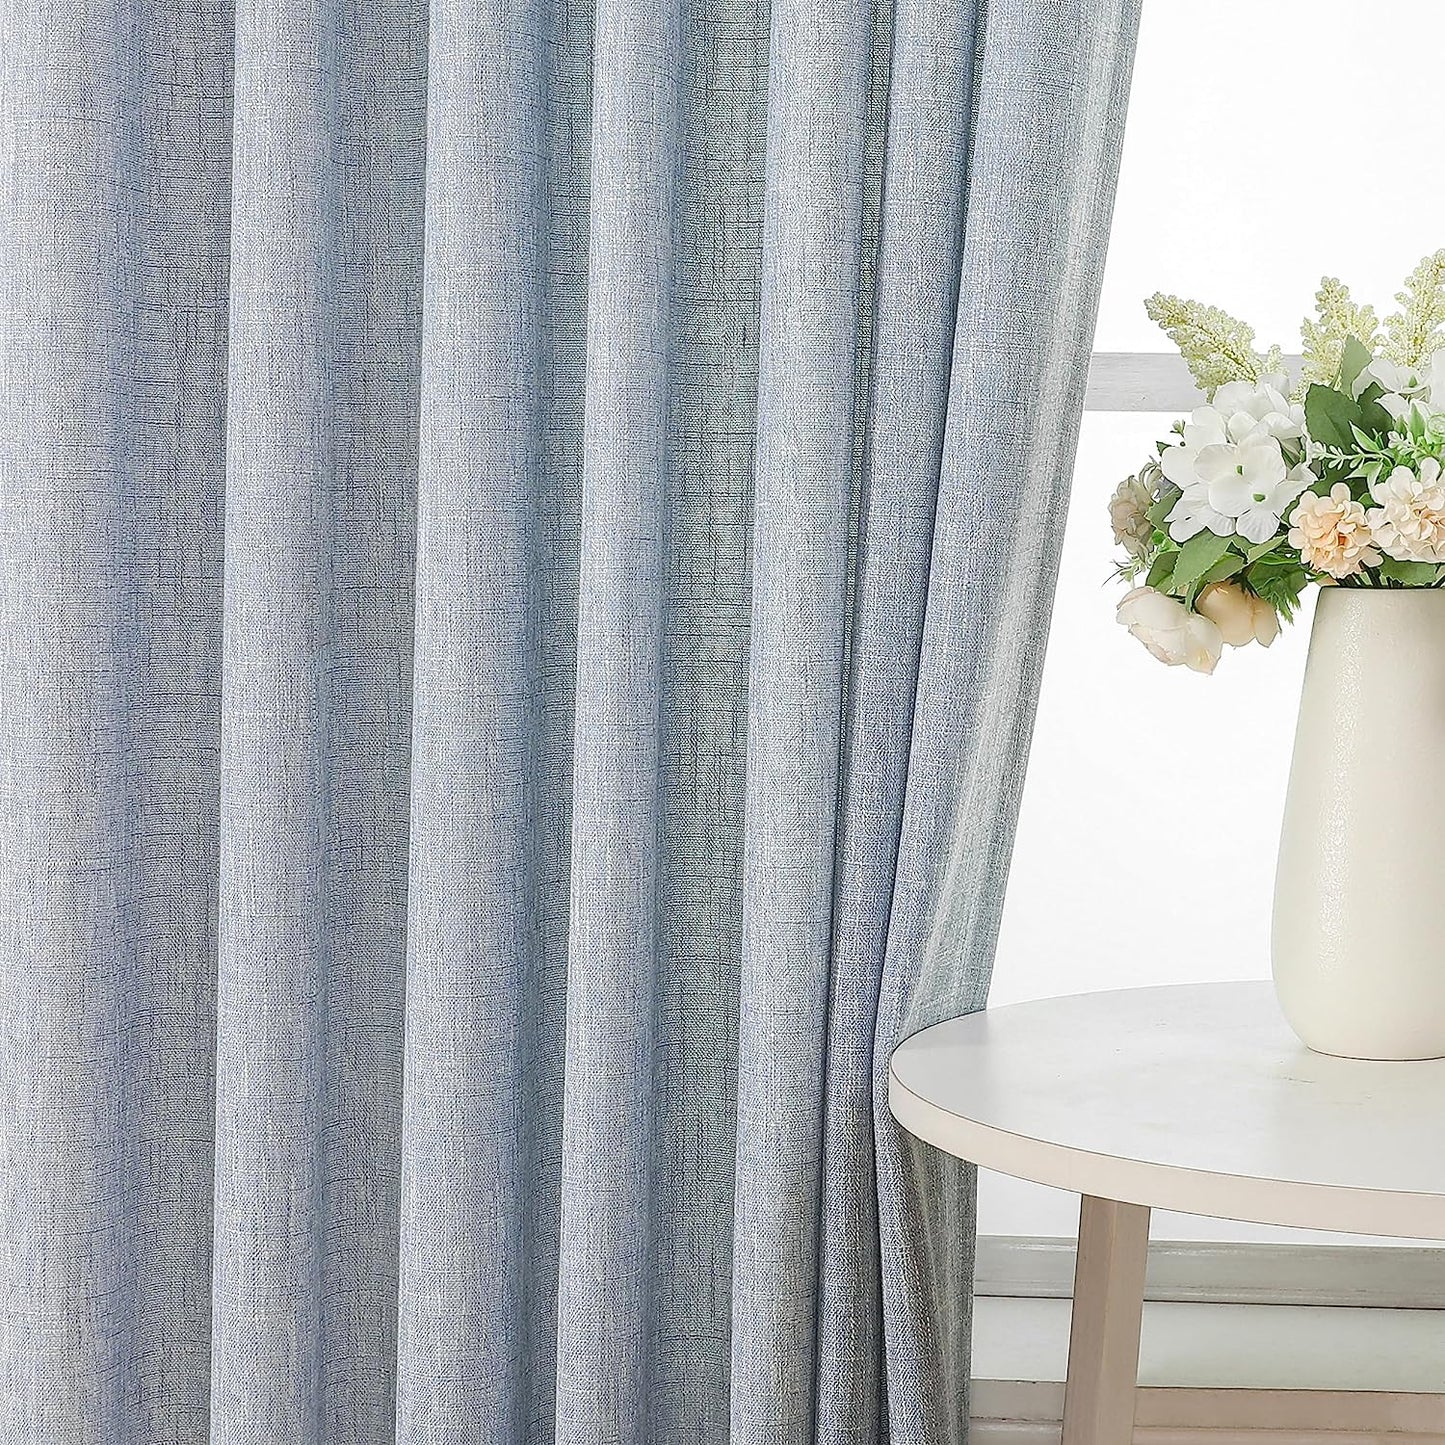 Vision Home Natural Pinch Pleated Semi Sheer Curtains Textured Linen Blended Light Filtering Window Curtains 84 Inch for Living Room Bedroom Pinch Pleat Drapes with Hooks 2 Panels 42" Wx84 L  Vision Home Chambray Blue/Pinch 40"X63"X2 